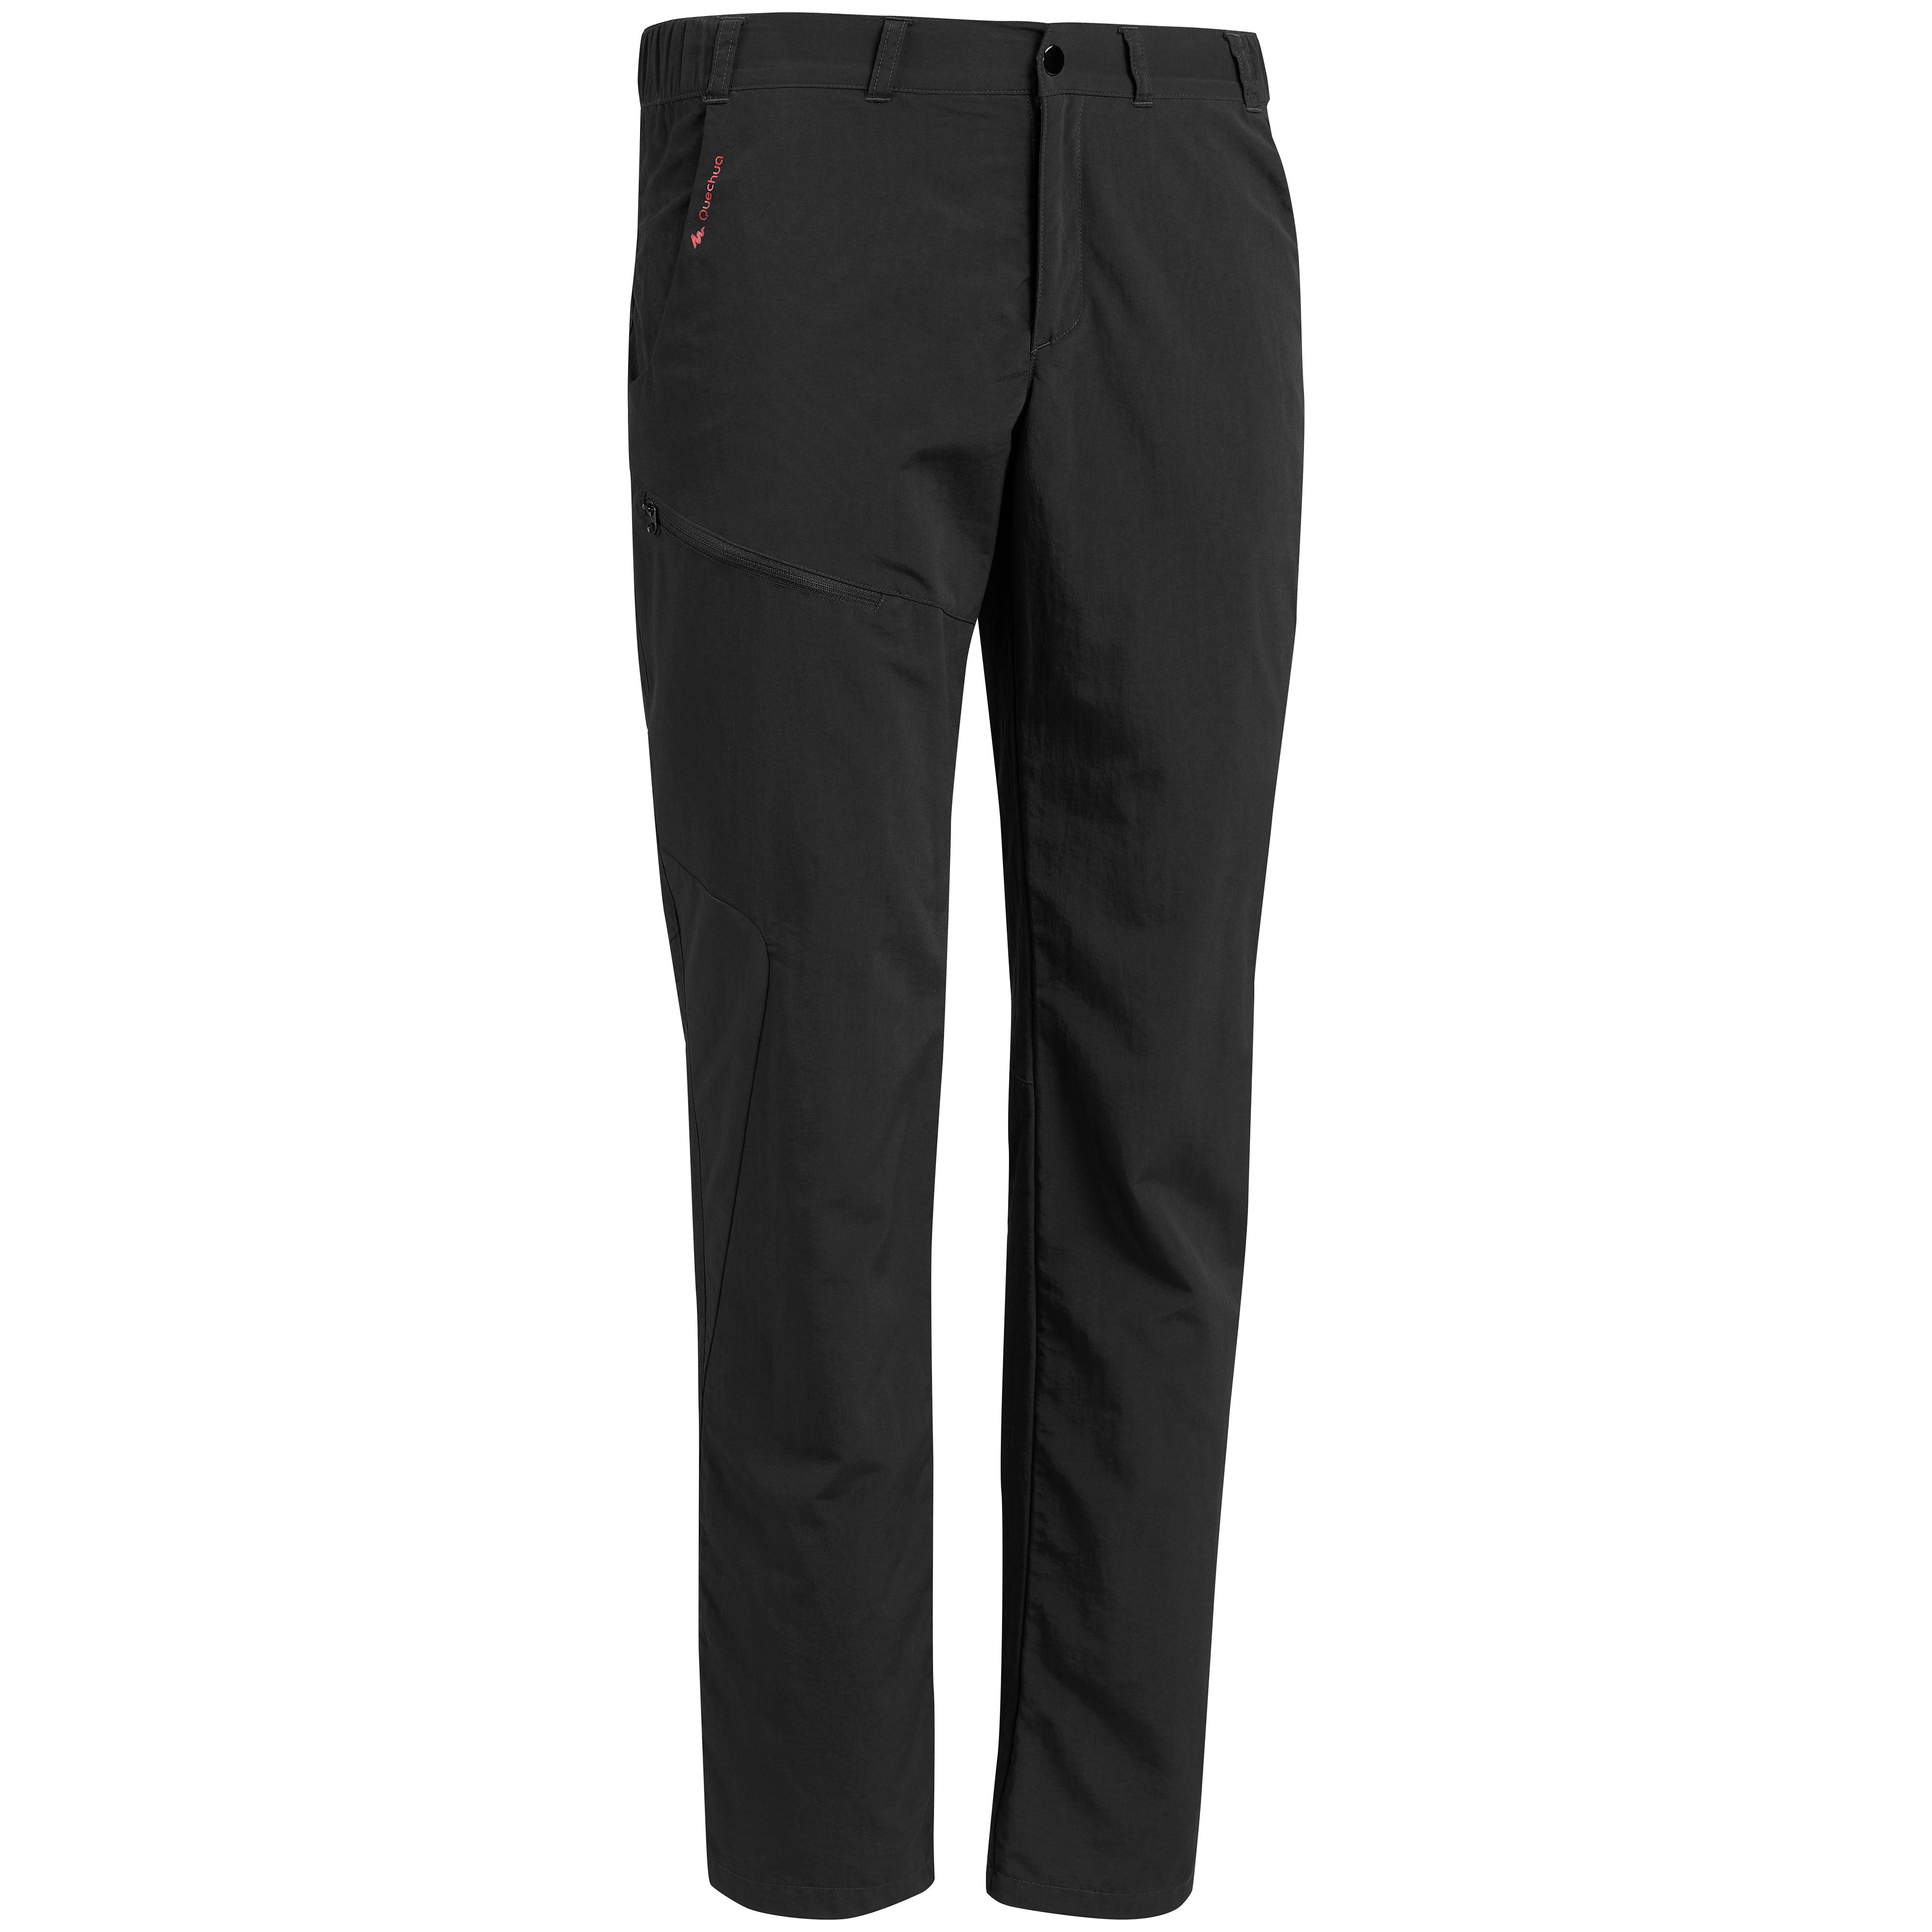 Buy Quickdry and Modular Pants Online 